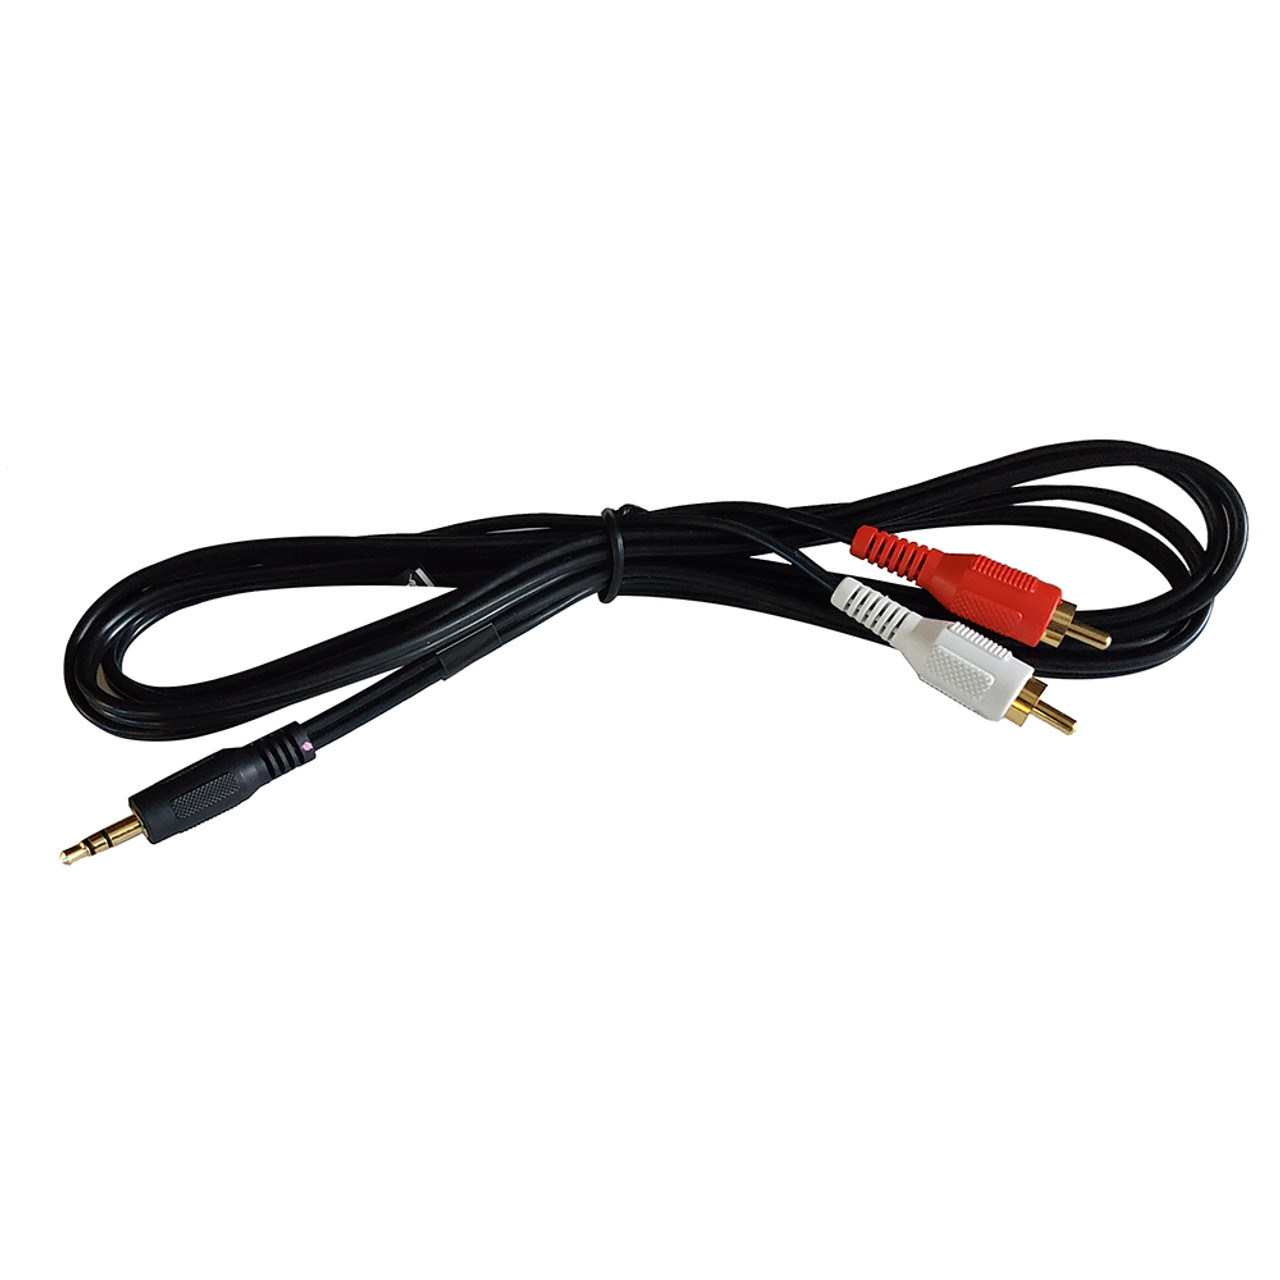 Fusion - MS-CBRCA3.5 Input Cable - 1 Male (3.5 mm) to 2 Male RCA - Apollo Lighting